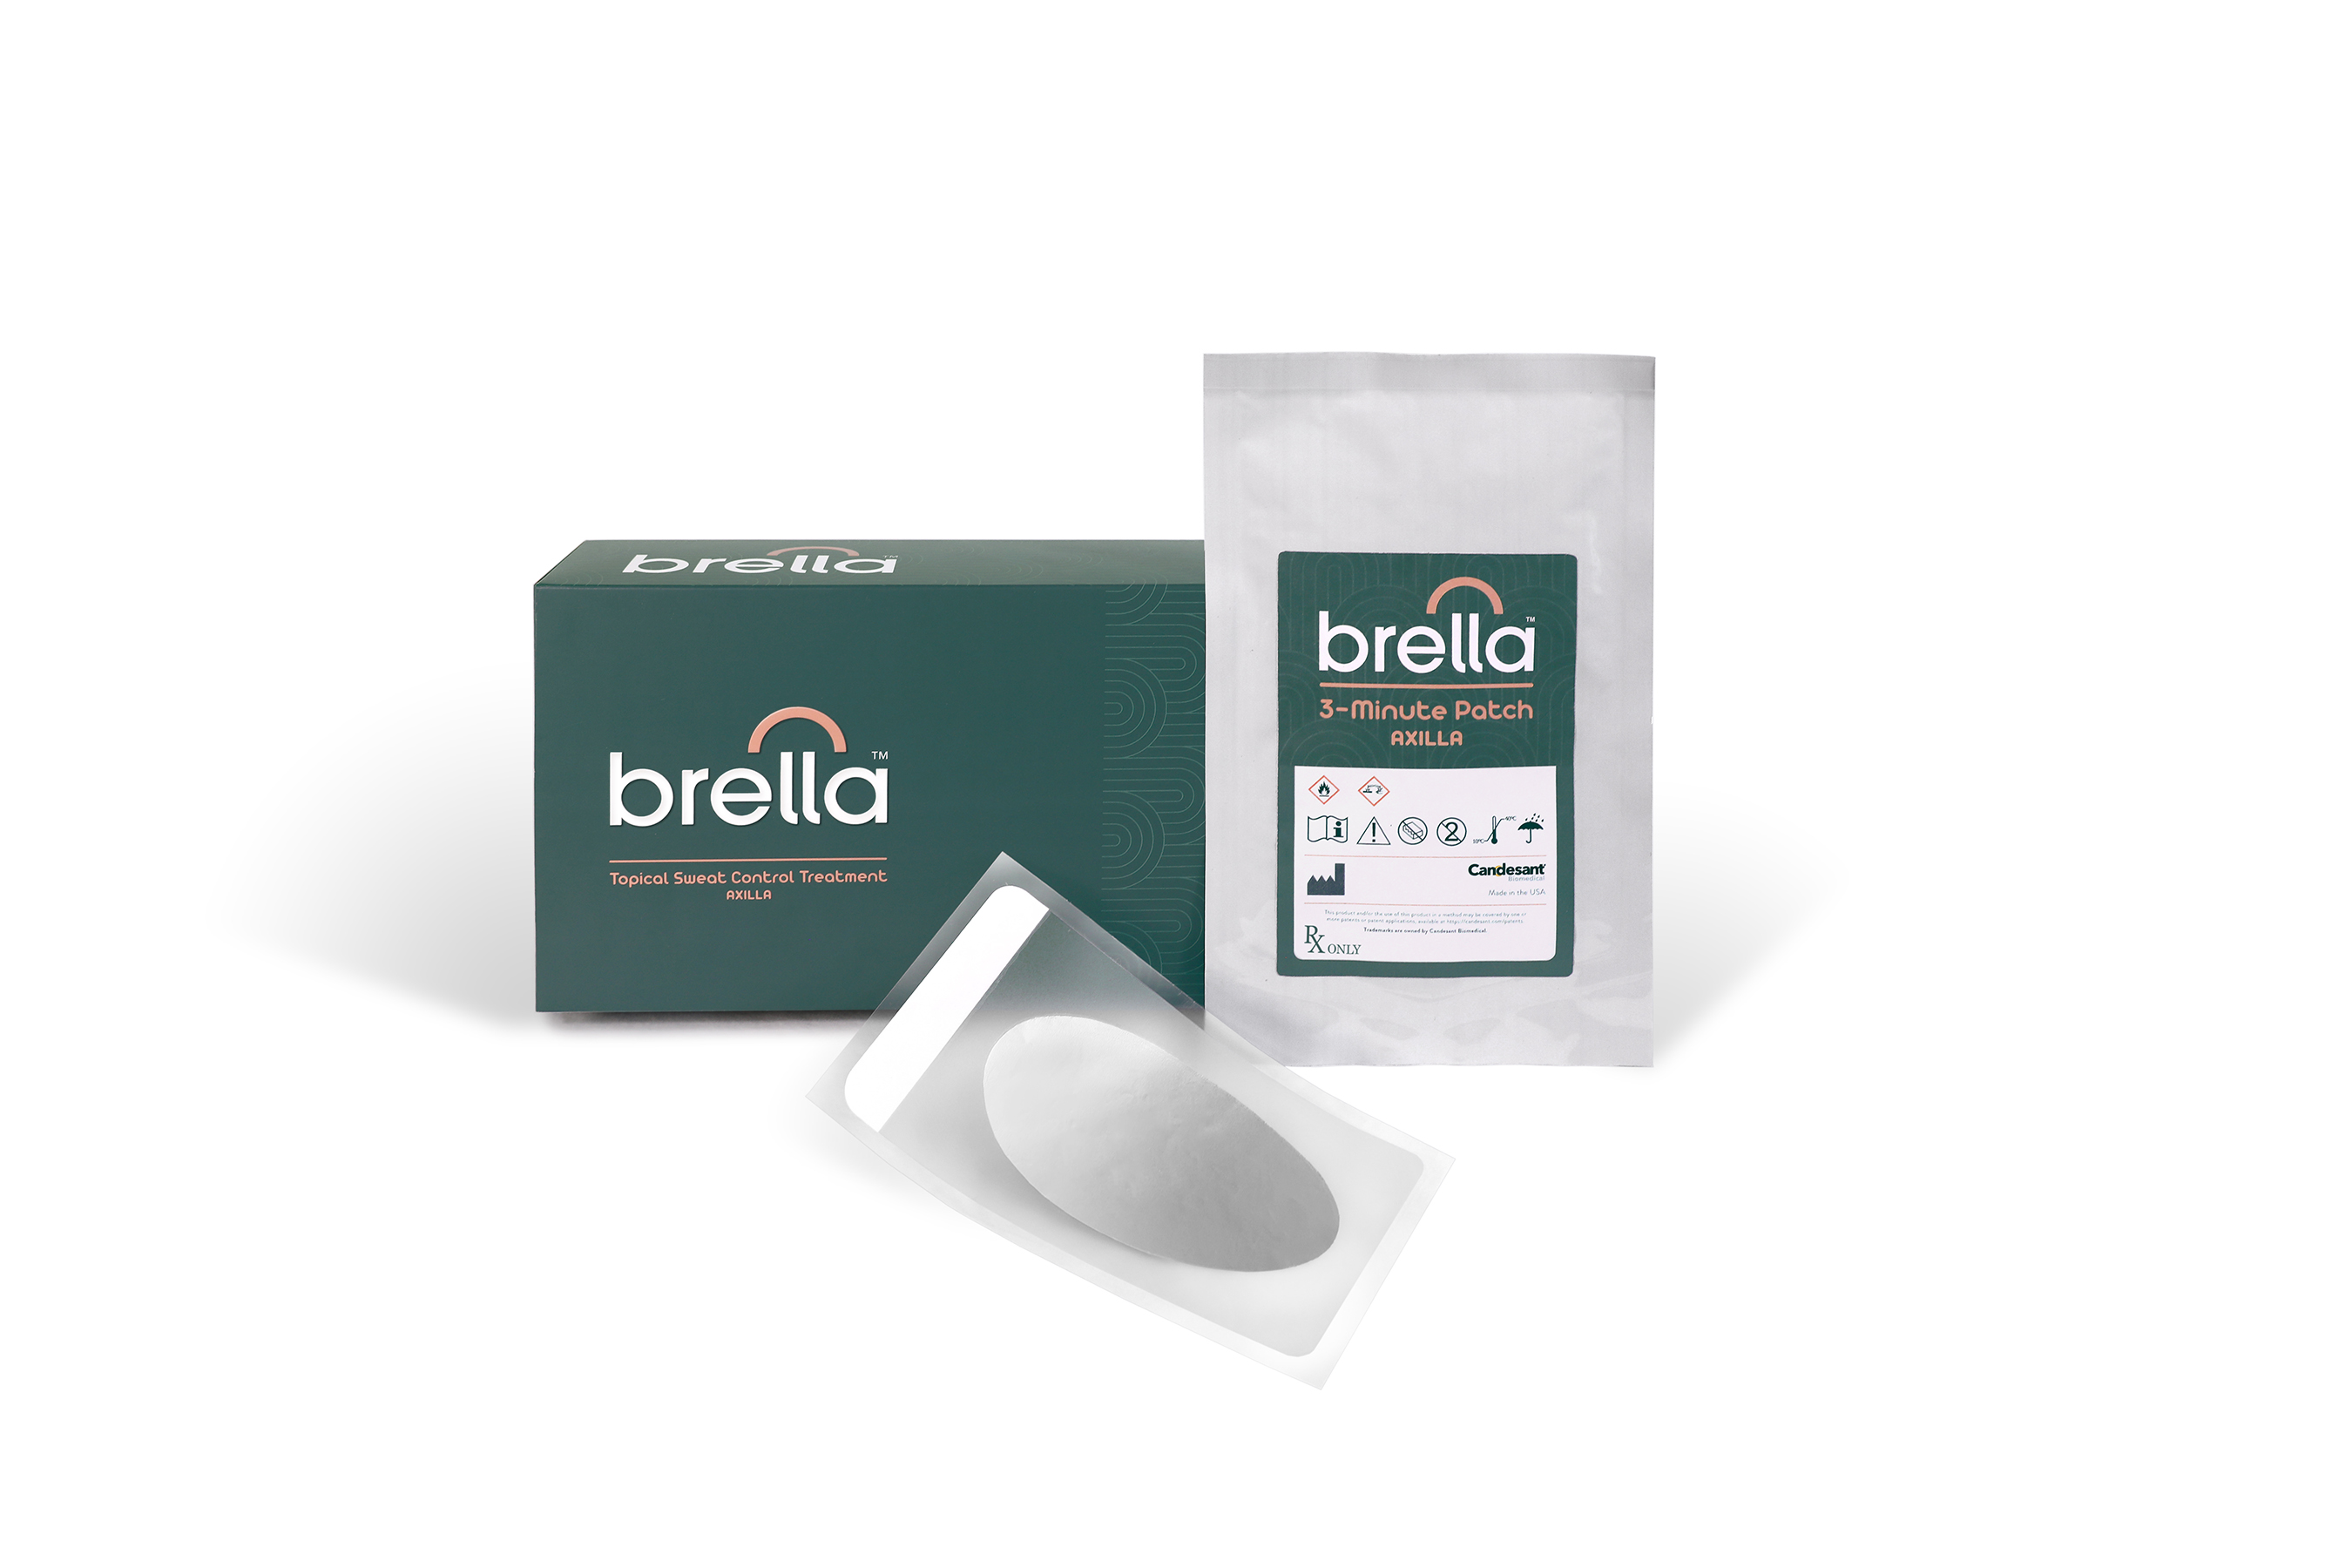 Brella™ SweatControl Patch™ - First and only 3-Minute Patch™ to significantly reduce excessive underarm sweating in adults with primary axillary hyperhidrosis; with results lasting 3-4 months. Provides a new in-office approach to sweat control that is fast, non-invasive, needle-free, aluminum-free, and affordable.